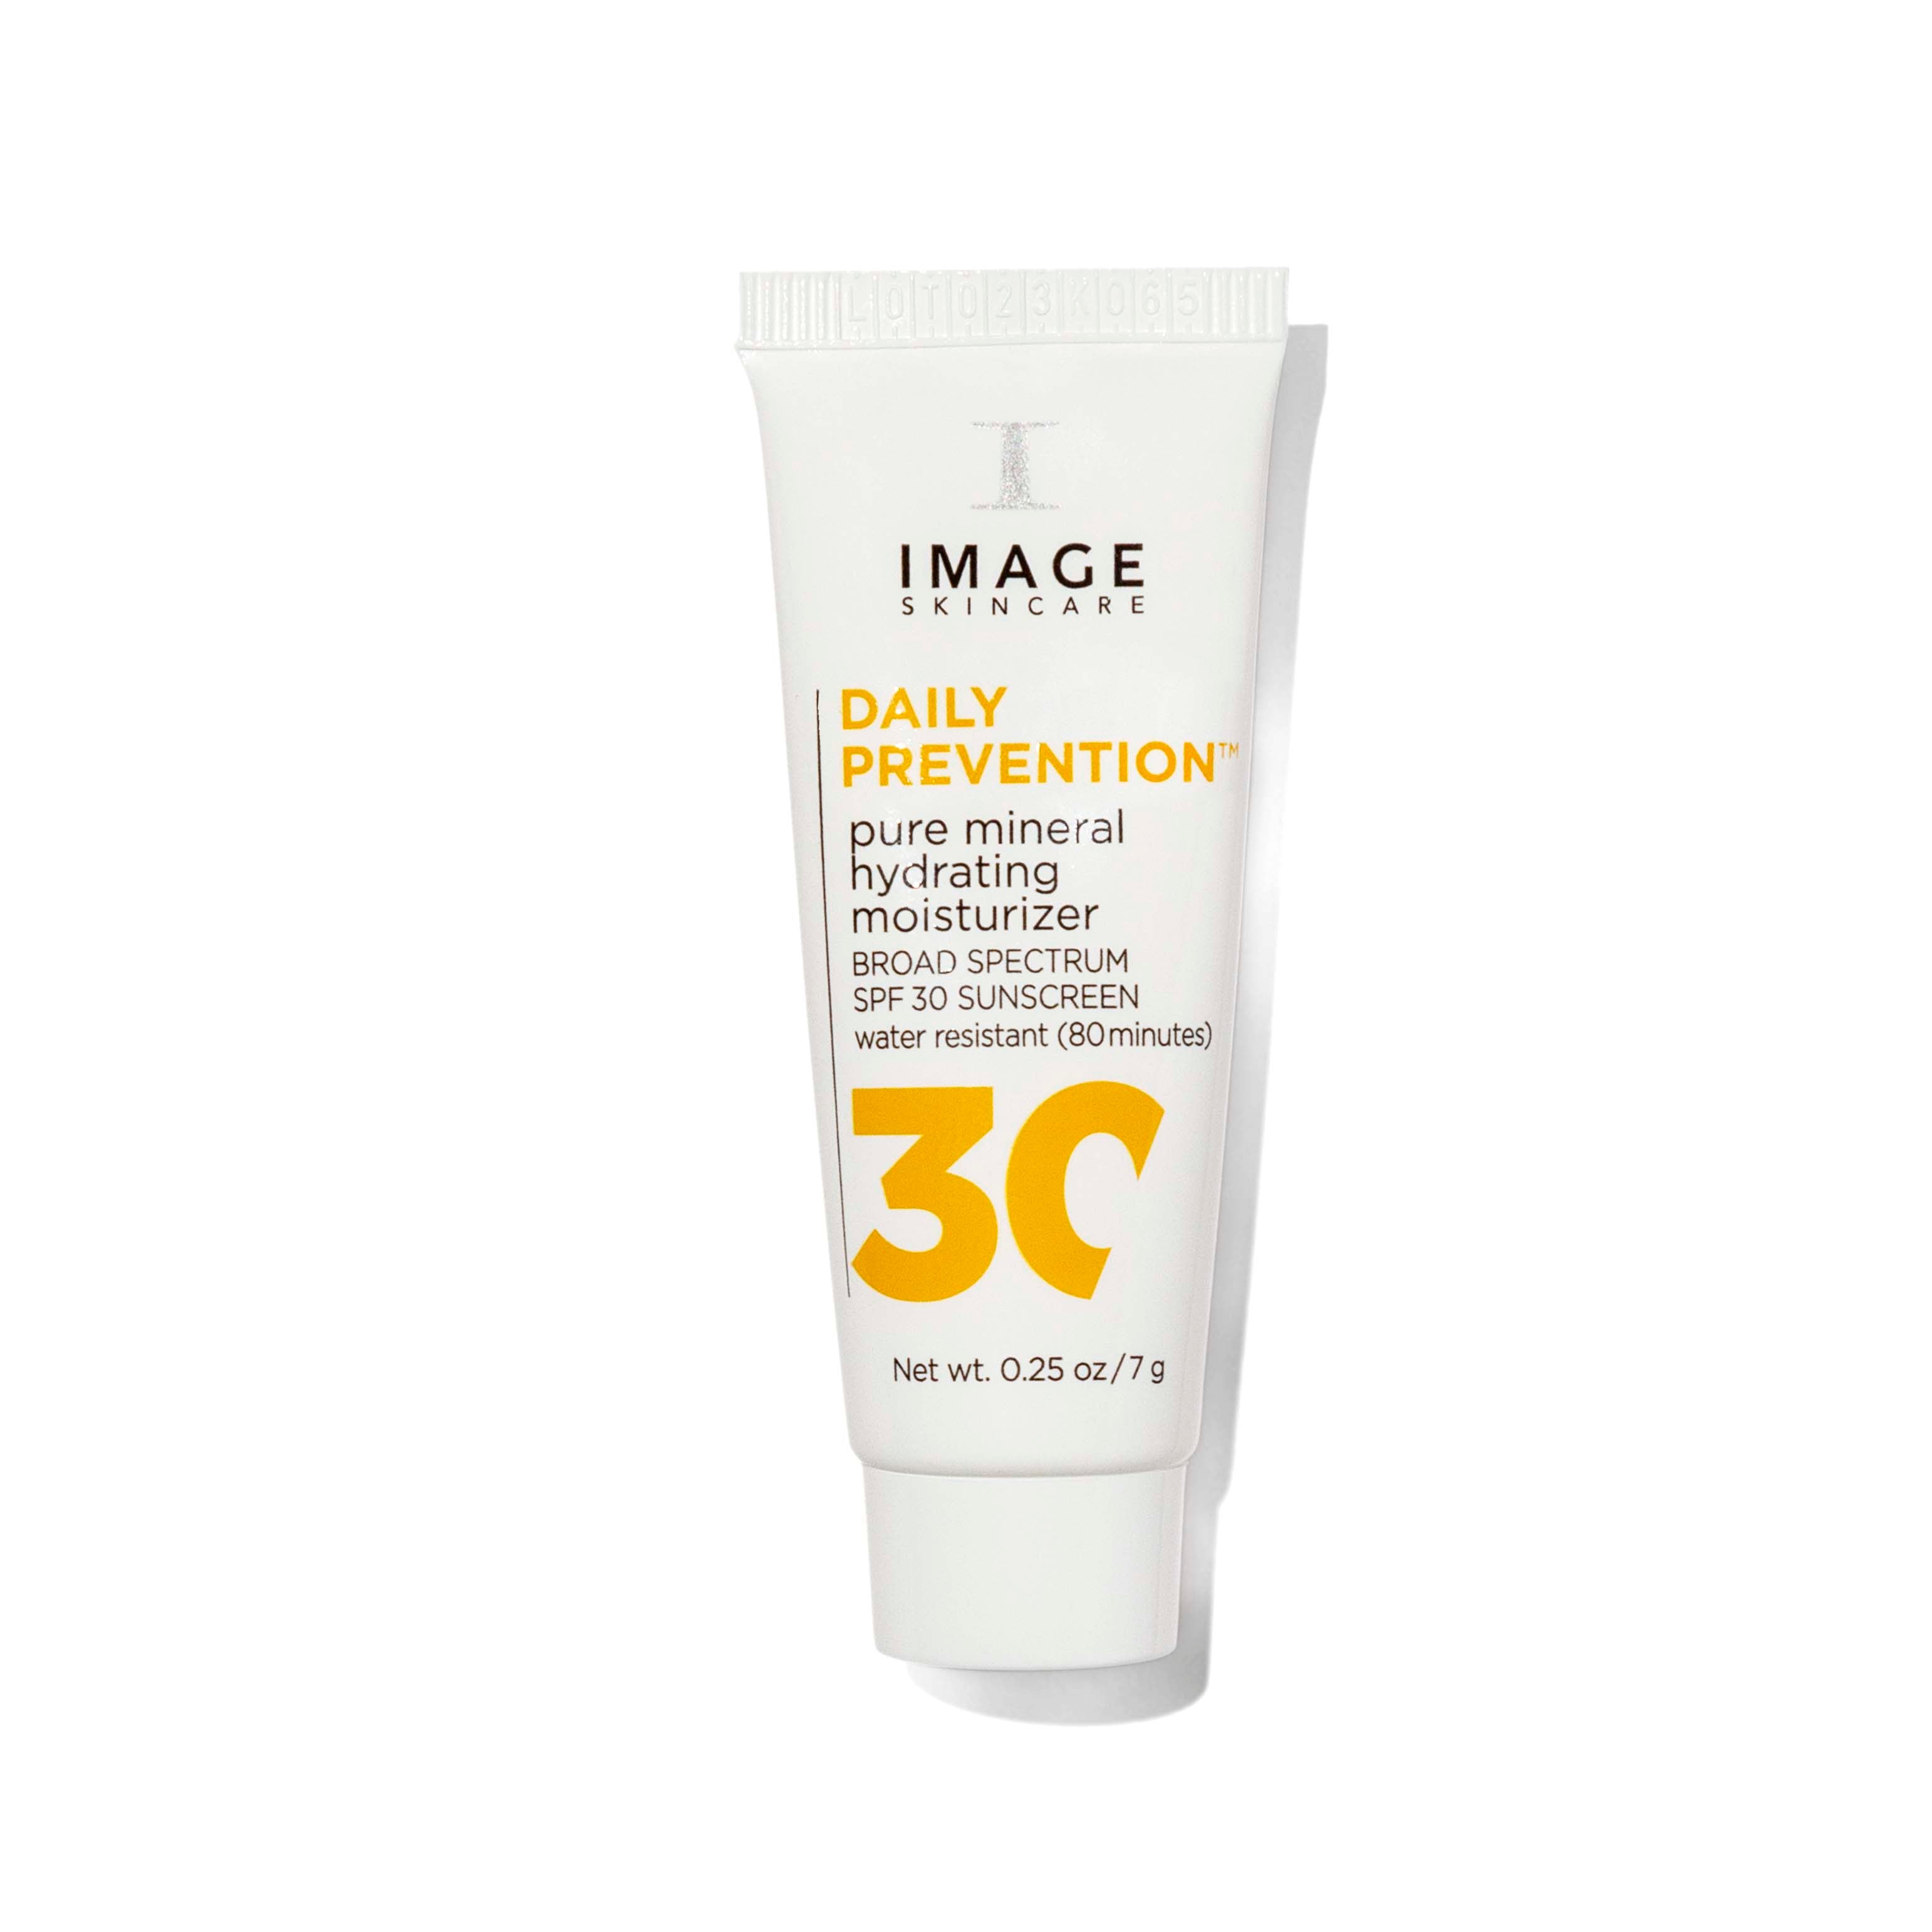 🎁 DAILY PREVENTION pure mineral hydrating moisturizer SPF 30 sample (50% off)